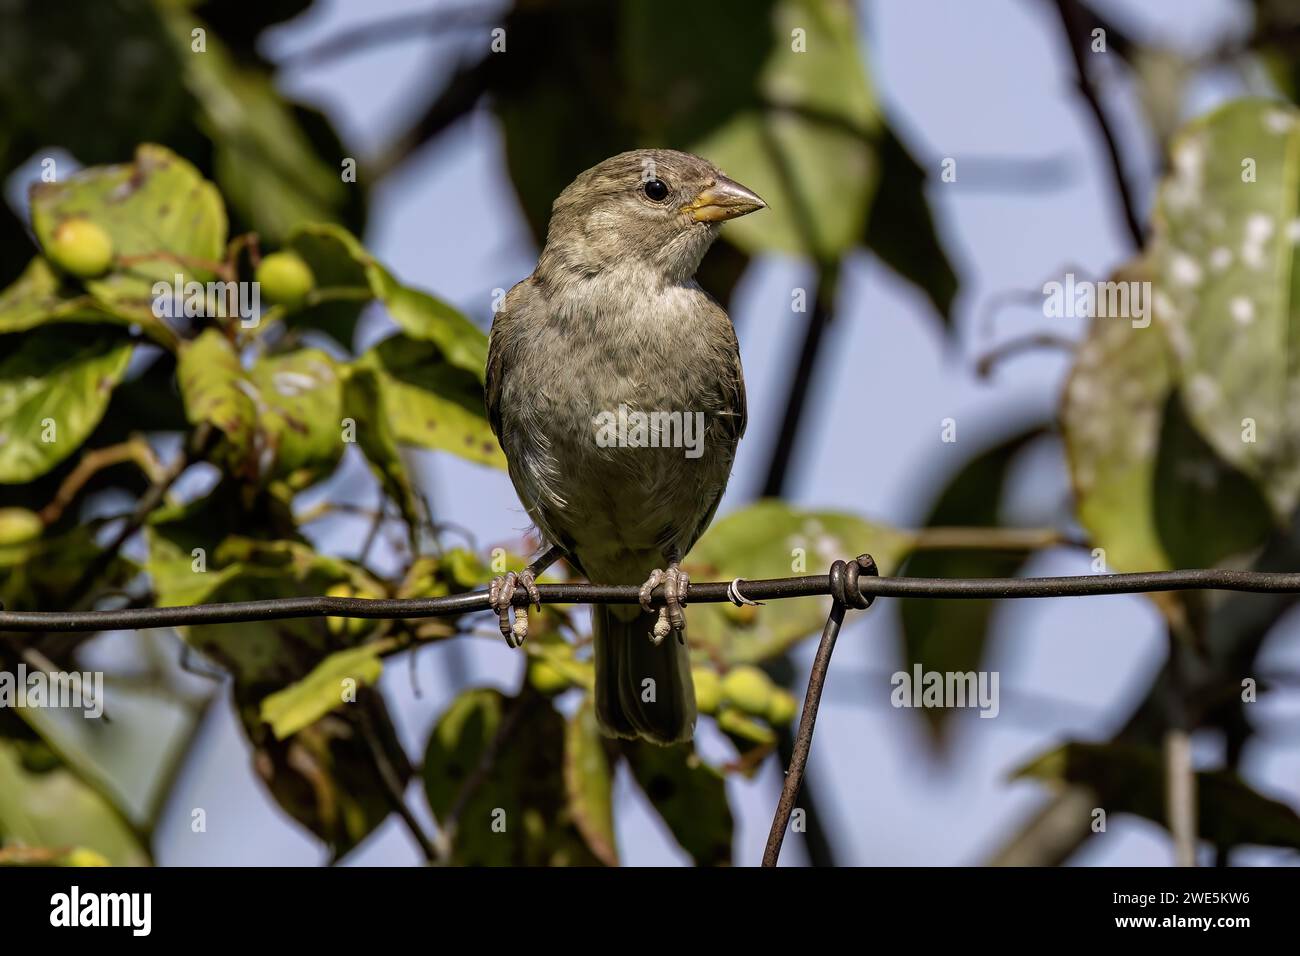 The house sparrow (Passer domesticus) Stock Photo